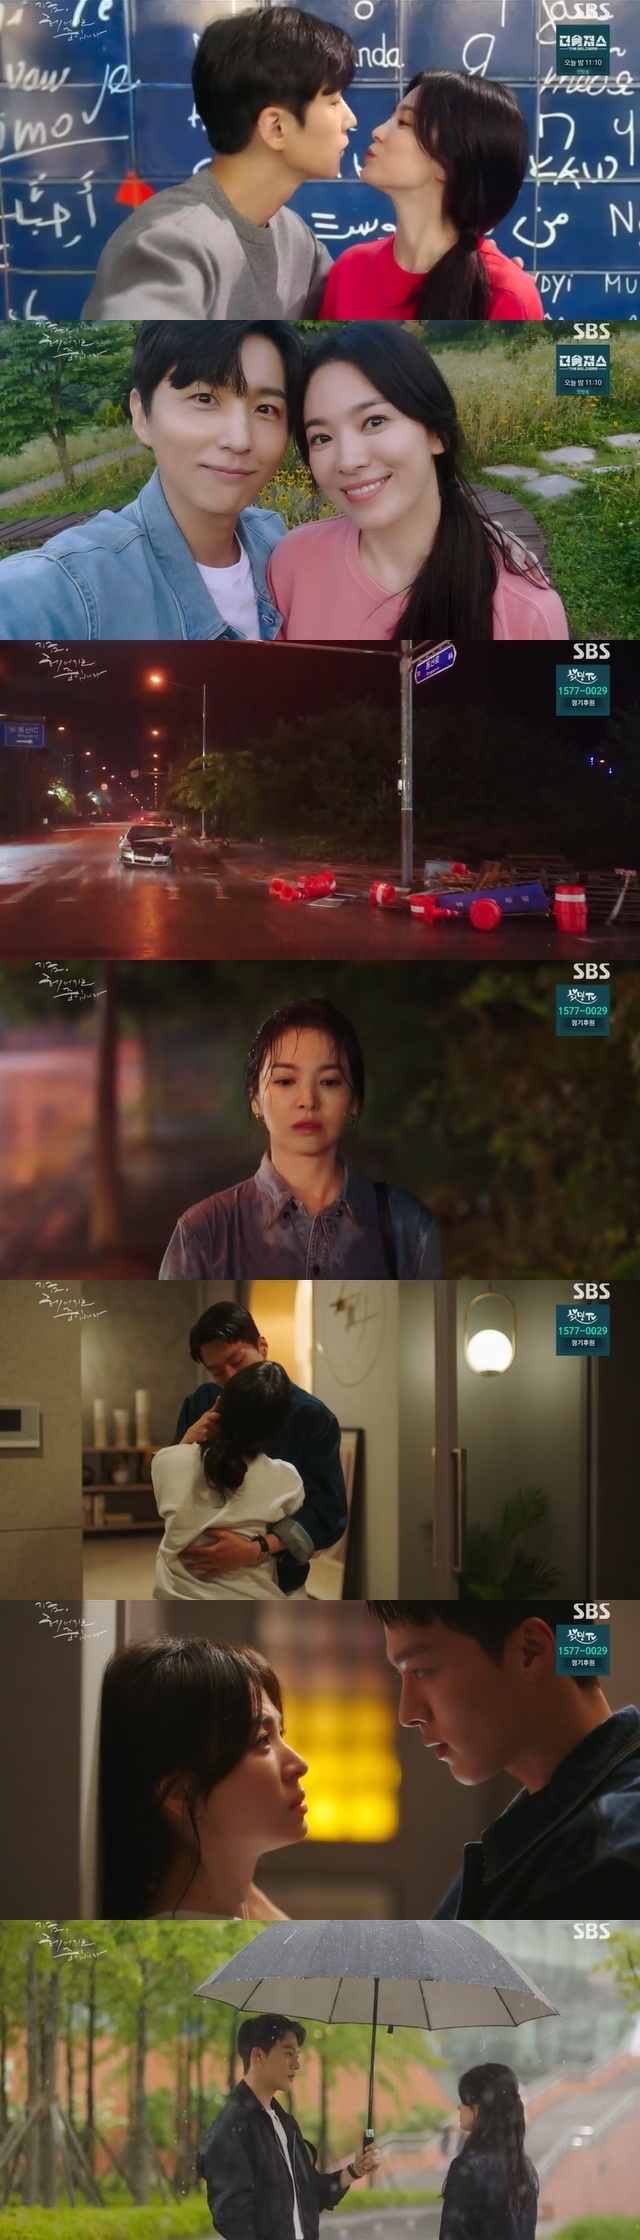 Song Hye-kyo Jang Ki-yong kissed again despite the problems that each had on their minds.In the third episode of SBSs Golden Earth Drama, Now, Im Breaking Up (playplayplayed by Jane, directed by Lee Gil-bok), which was broadcast on November 19, the relationship between Hae Young-eun (Song Hye-kyo) and Jang Ki-yong became more complicated and difficult.On that day, Ha Young-eun pushed Yoon Jae-guk hard for Hwang Chi-sook (Choi Hee-seo).So, the first thing Ha Young did was ask Yoon Jae-guk to ask him to do his opponent who met him on the day.In addition, Ha Young-eun defined all the pasts that he and Yoon Jae-guk had made as happening.Yoon Jae-kook, who was dissatisfied with Ha Young-eun, took out Yoon Soo-wans story and stimulated Ha Young-eun. Yoon Jae-kook asked, Did you know that Yoon Soo-wan was sincere?Ha Young-eun did not give any answers to Yoon Jae-guk.Yoon Jae-kook, who had seen Ha Young-eun at the hotel earlier, built up Misunderstood about Ha Young-eun, but soon there was a case of solving Misunderstood.After having a dinner party, Ha Young went home and got a chance to talk for a longer time along with Seok Do-hoon (Kim Joo-heon) Kwak Soo-ho (Yoon Na-moo) along with a drunken Hwang Chi-sook.Ha Young-eun asked Yoon Jae-guk, Is Yoon Soo-wan really a meaningless person to Ha Young-eun? He asked, What kind of meaning should Yoon Soo-wan mean to me?In the meantime, Ha Young-eun said, Is it so sincere that what I did to me is a diving farewell?In fact, Ha Young-eun, who had fallen in love with Yun Su-wan ten years ago and became a lover, made a promise with Yun Su-wan one day and was naturally separated by the wind.Yoon Jae-guk, who learned about the true nature of Ha Young-eun, was embarrassed, but did not immediately tell him that the truth he knew, the car accident that Yoon Soo-wan went to see Ha Young-eun 10 years ago, died.Instead, Yoon chose to show his mind to Ha Young-eun, who returned to Ha Young-euns house after all the party members returned home.Yoon Jae-kook has been wondering how much weight and meaning Ha Young-eun thinks of himself as an excuse for himself to be around him while he is talking about Yoon Soo-wan.Yoon kissed as soon as he entered Ha Young-euns house. Ha Young-eun, who had been kissing Yoon Jae-guk, was also deeply troubled.Ha Young said, I do not want to lose what I have done by playing emotions. Ive already experienced enough. Experience is not courageous, but frightening.I am afraid of you now, he said, but continued to kiss Yoon Jae-guk.